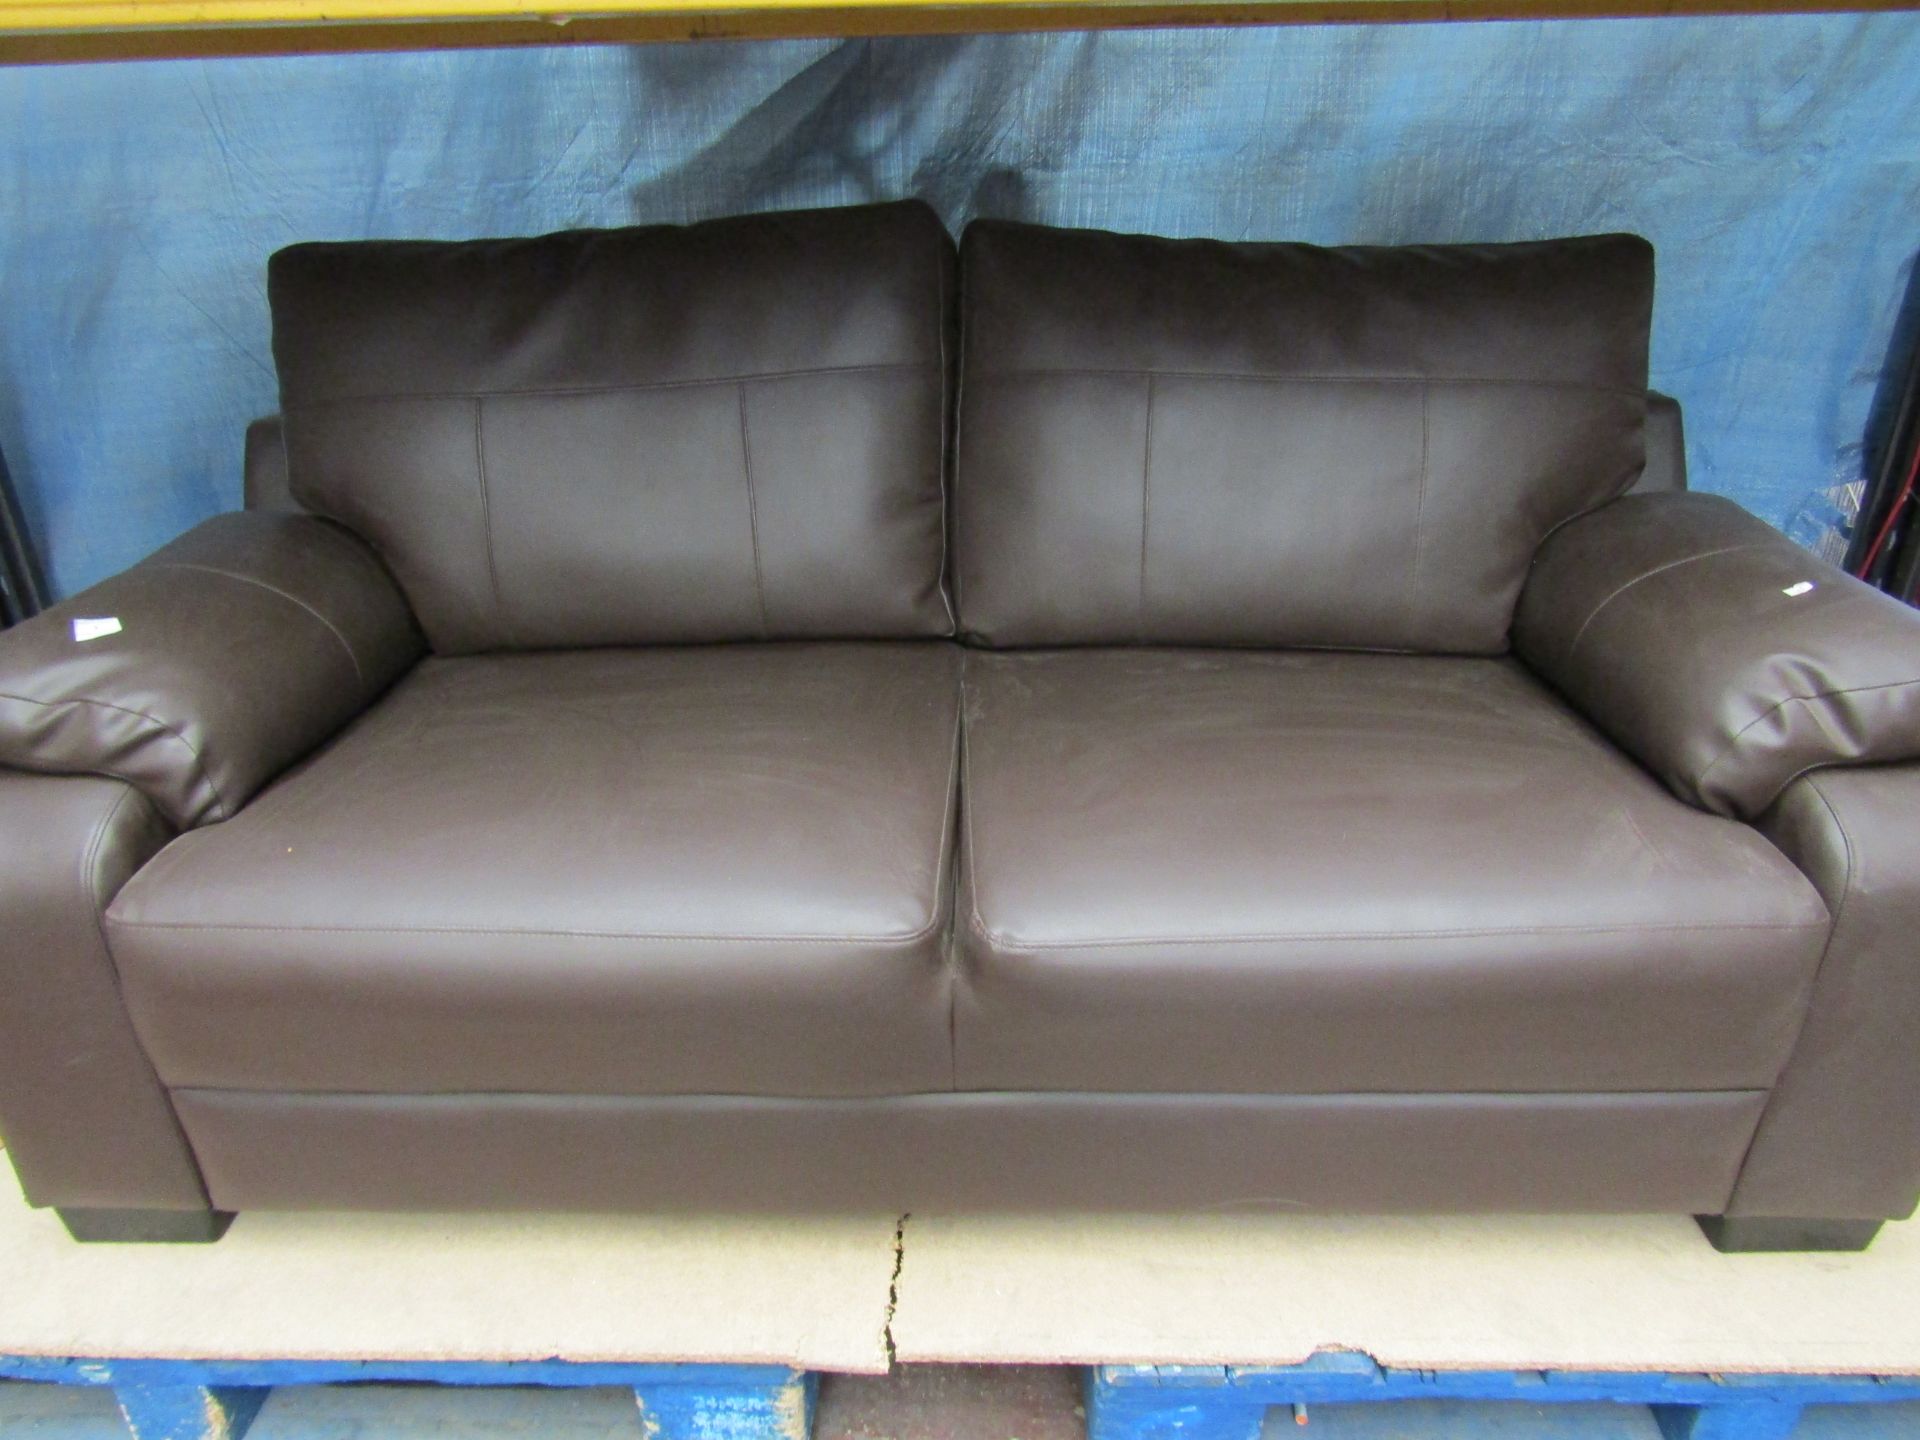 3 Seater Brown Faux Leather Sofa.  Dimensions: H 86, W 183, D 82 cm (approx.) Fixed foam-filled seat